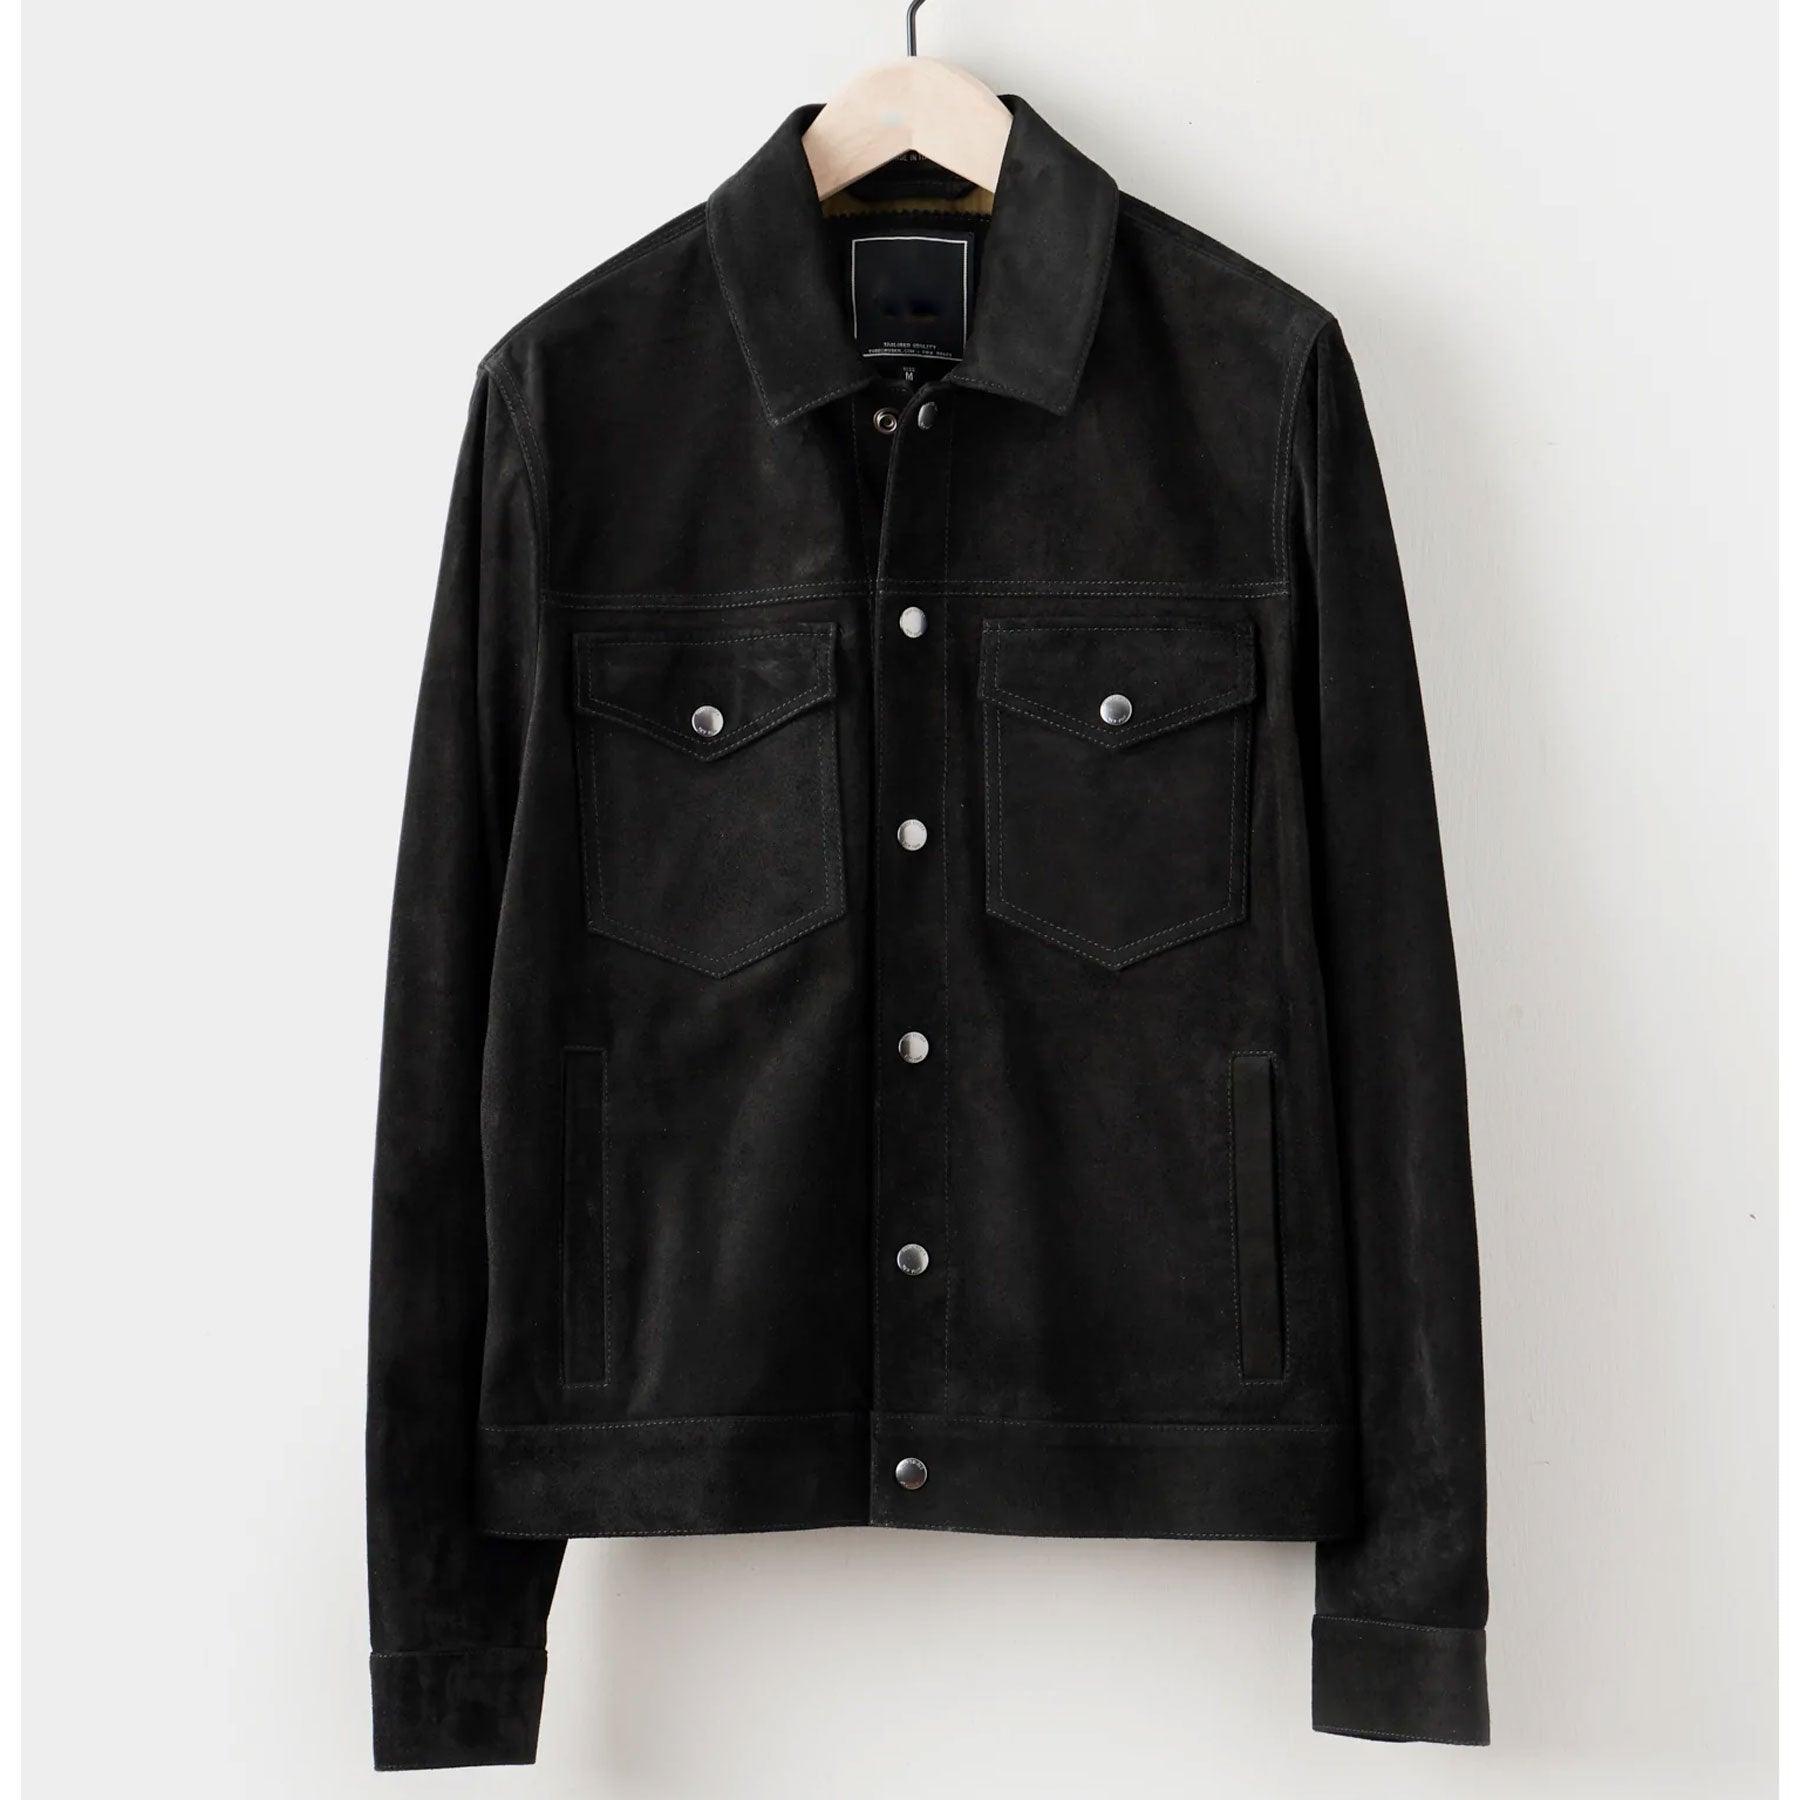 Black Men’s Suede Leather Jacket  Shirt Jeans Style - Leather Loom